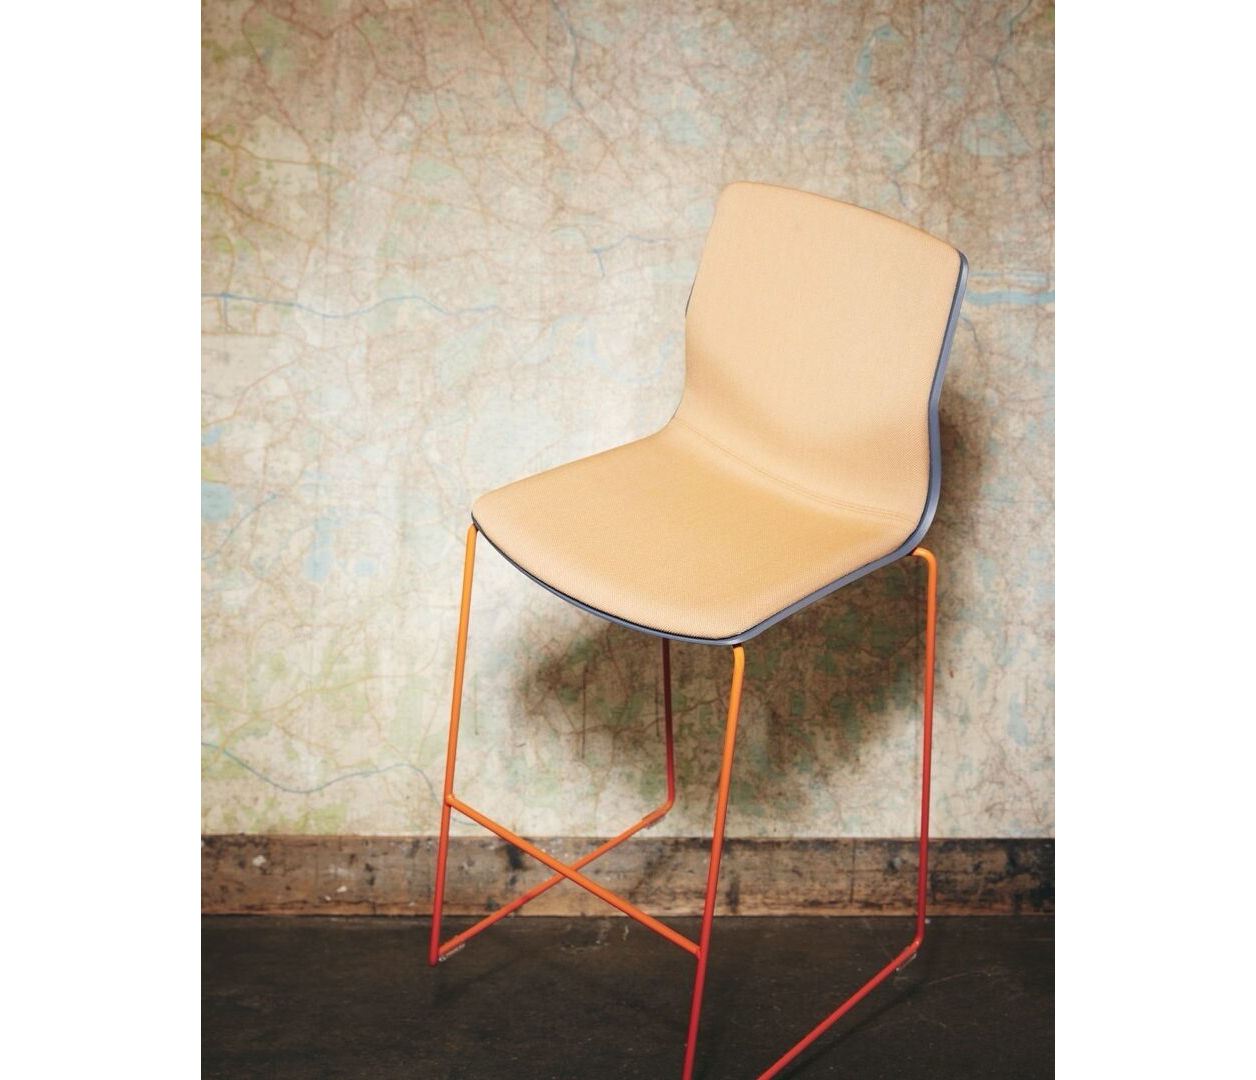 OCEE&FOUR – Chairs – FourSure 105 – Marketing Image 1 Large Large 2